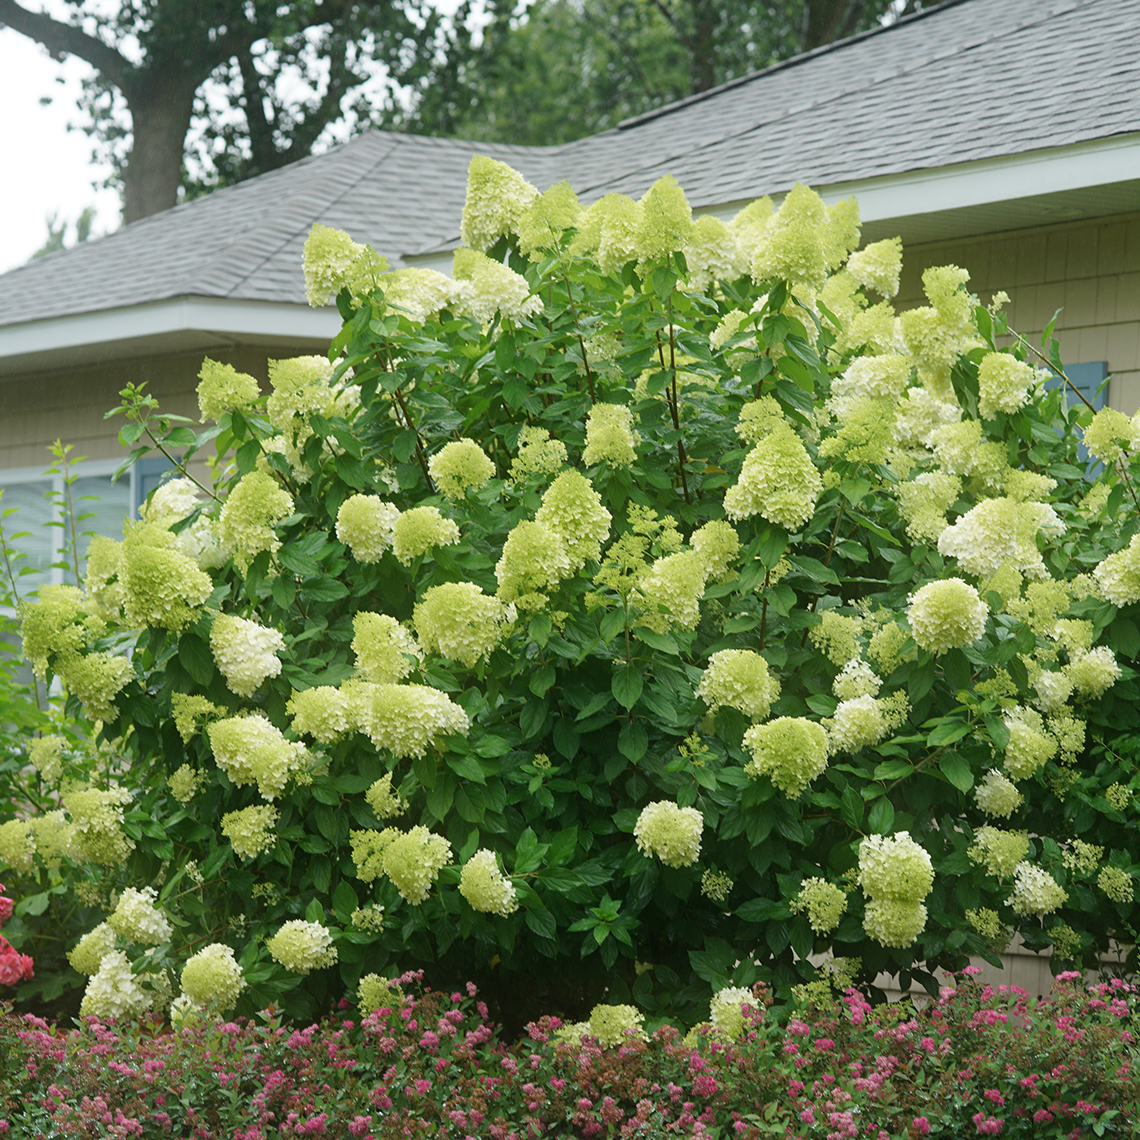 A very large specimen of Limelight hydrangea covered in lime green mophead flowers in front of a house